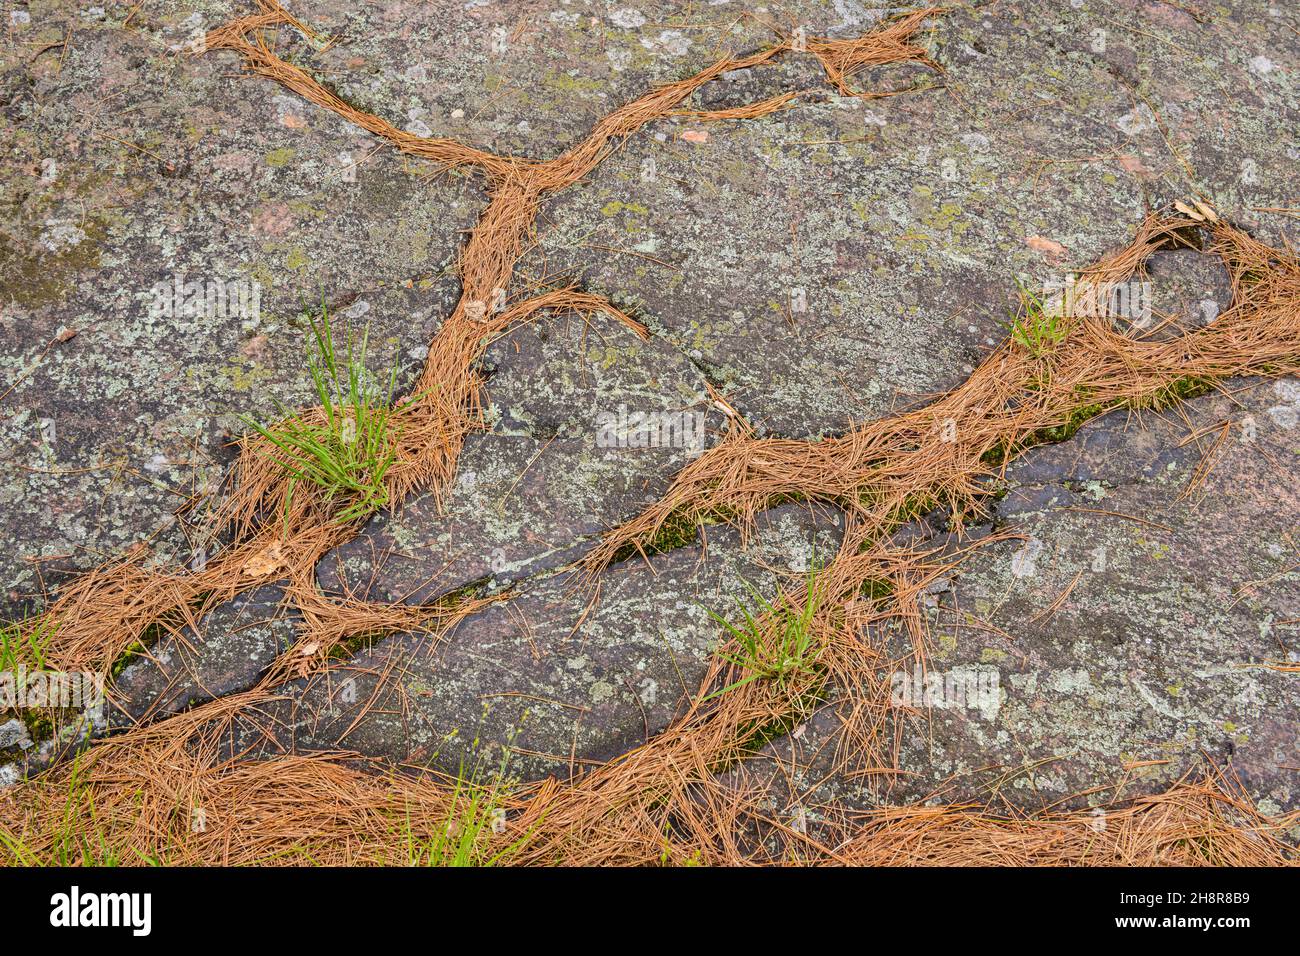 Pre-Cambrian rock outcrops and collected pine straw in a pine forest, Killarney Provincial Park, Killarney, Ontario, Canada Stock Photo